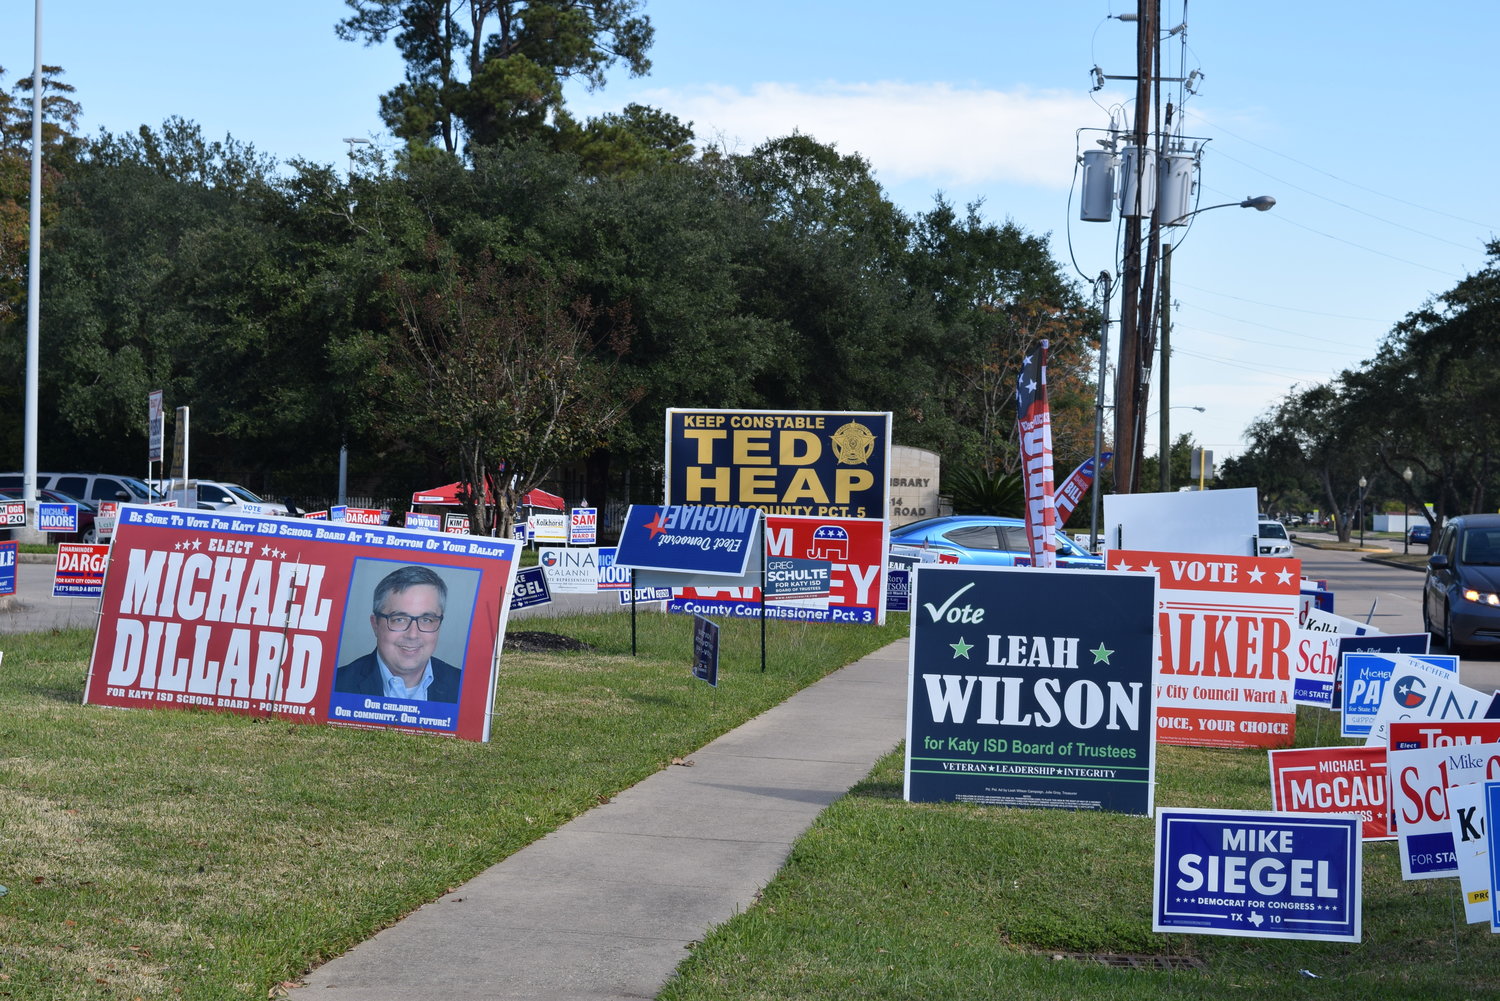 Record turnout throughout the country, including the three counties that comprise the Katy area left some results in the lurch Tuesday night right before press time. However, some candidates held strong leads making them the apparent winners of their respective races. In funding races, first responders and mobility passed in the Katy area while education bonds either didn’t make it onto the ballot or failed.